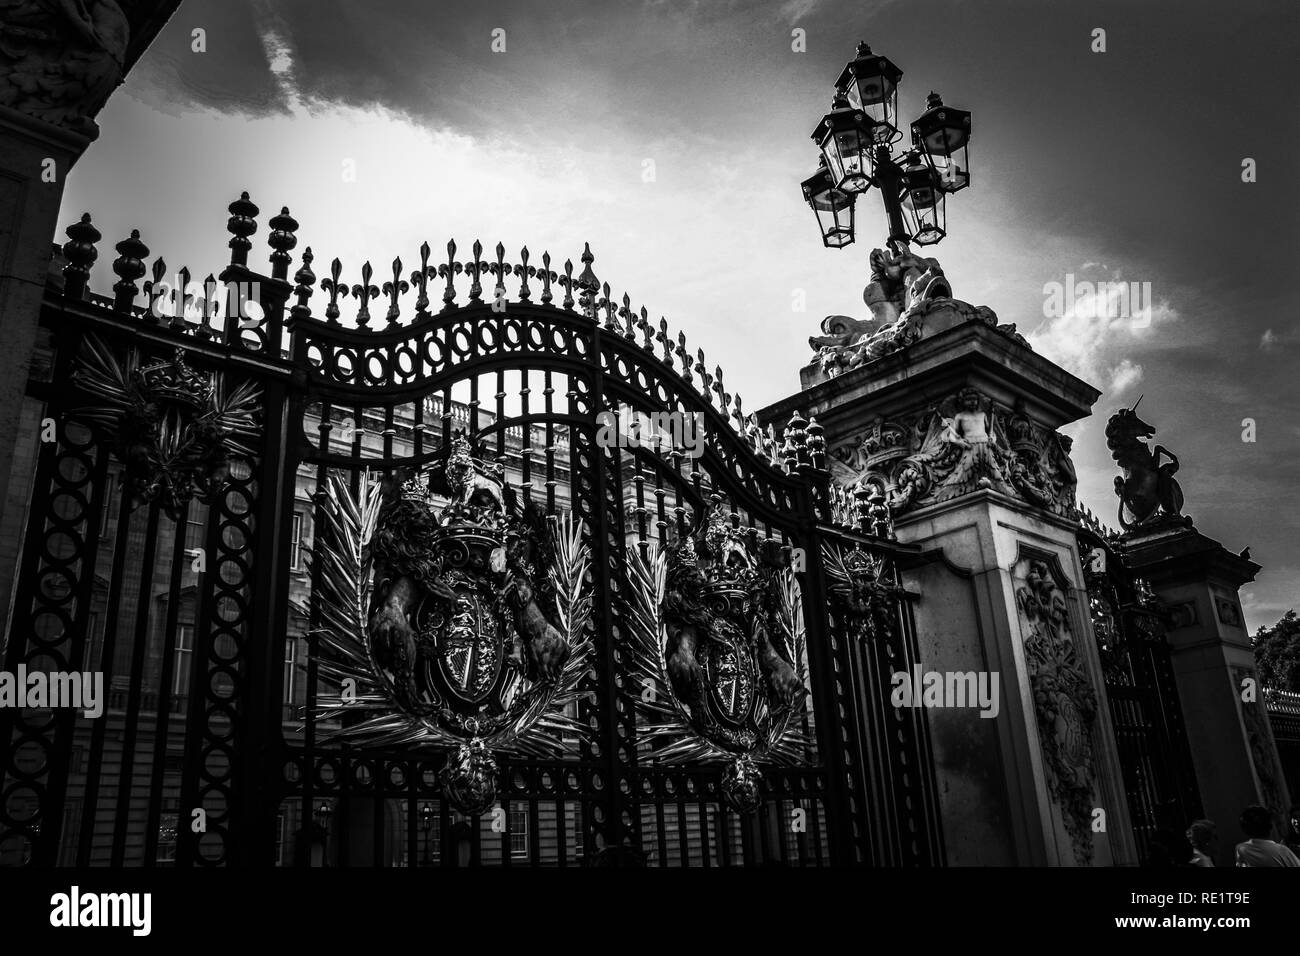 High contrast b&w picture of the ornate main gate with the royal coat of arms at Buckingham Palace in London, United Kingdom Stock Photo